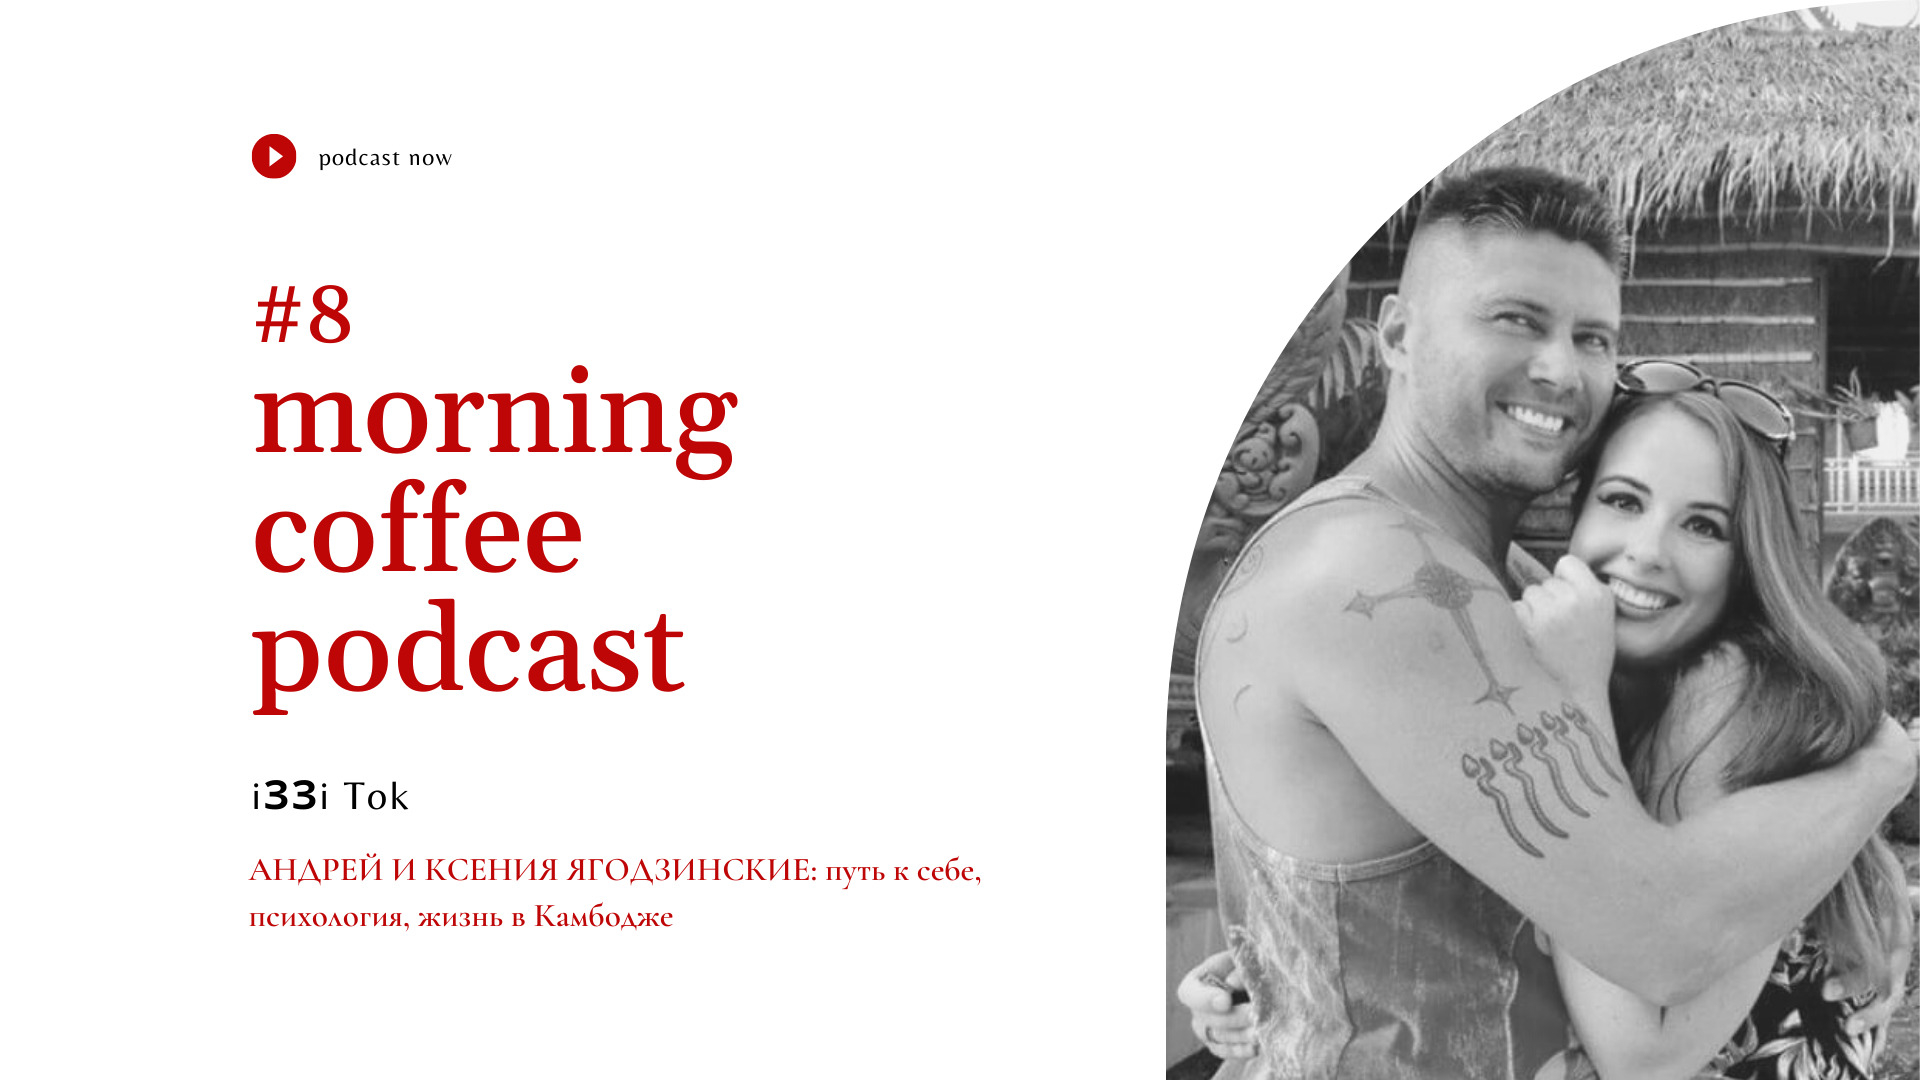 Morning Coffee Podcast _ CTj podcasts #8